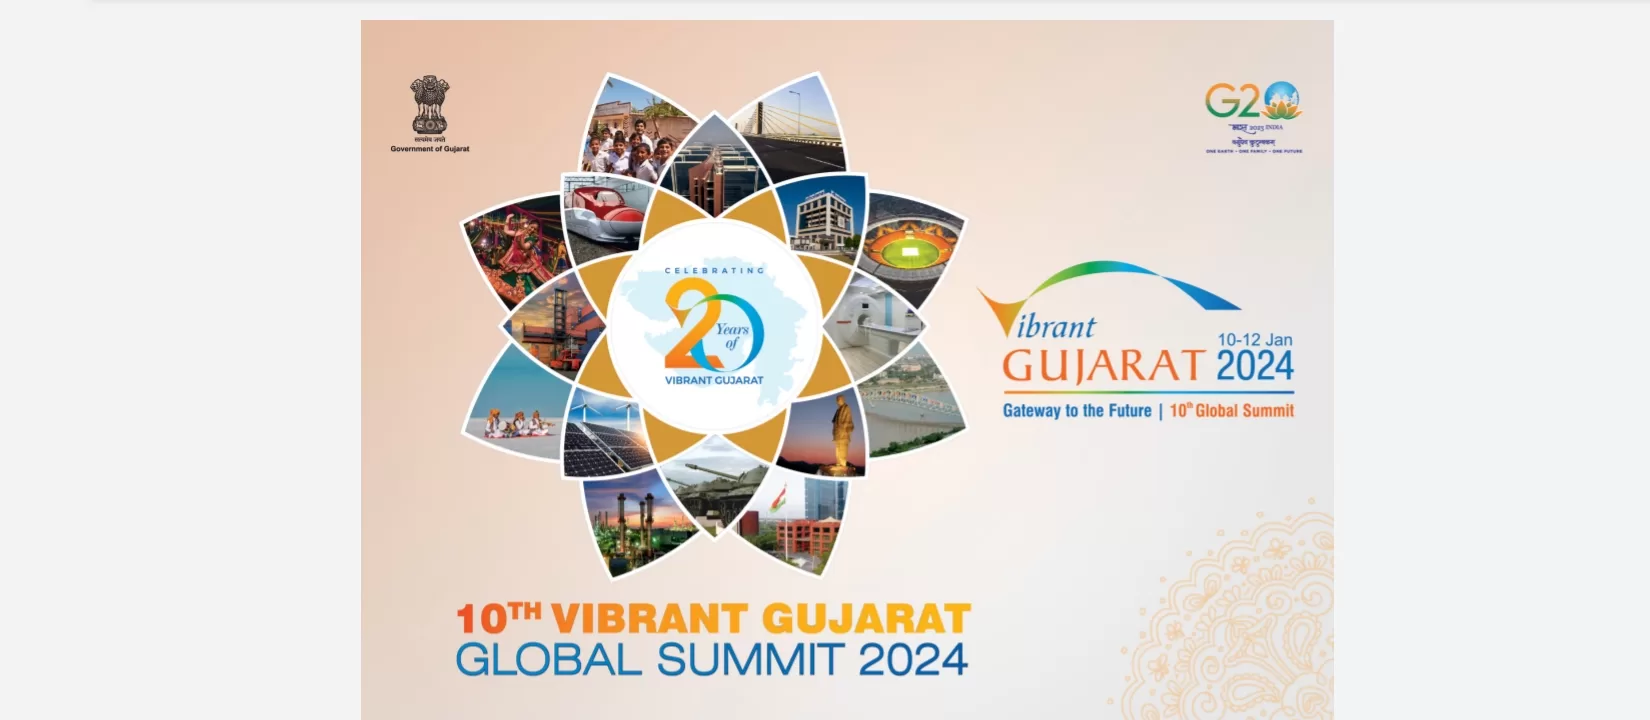 Five more MoUs worth Rs. 1,095 Crore signed in the run-up to the Vibrant Gujarat Global Summit 2024